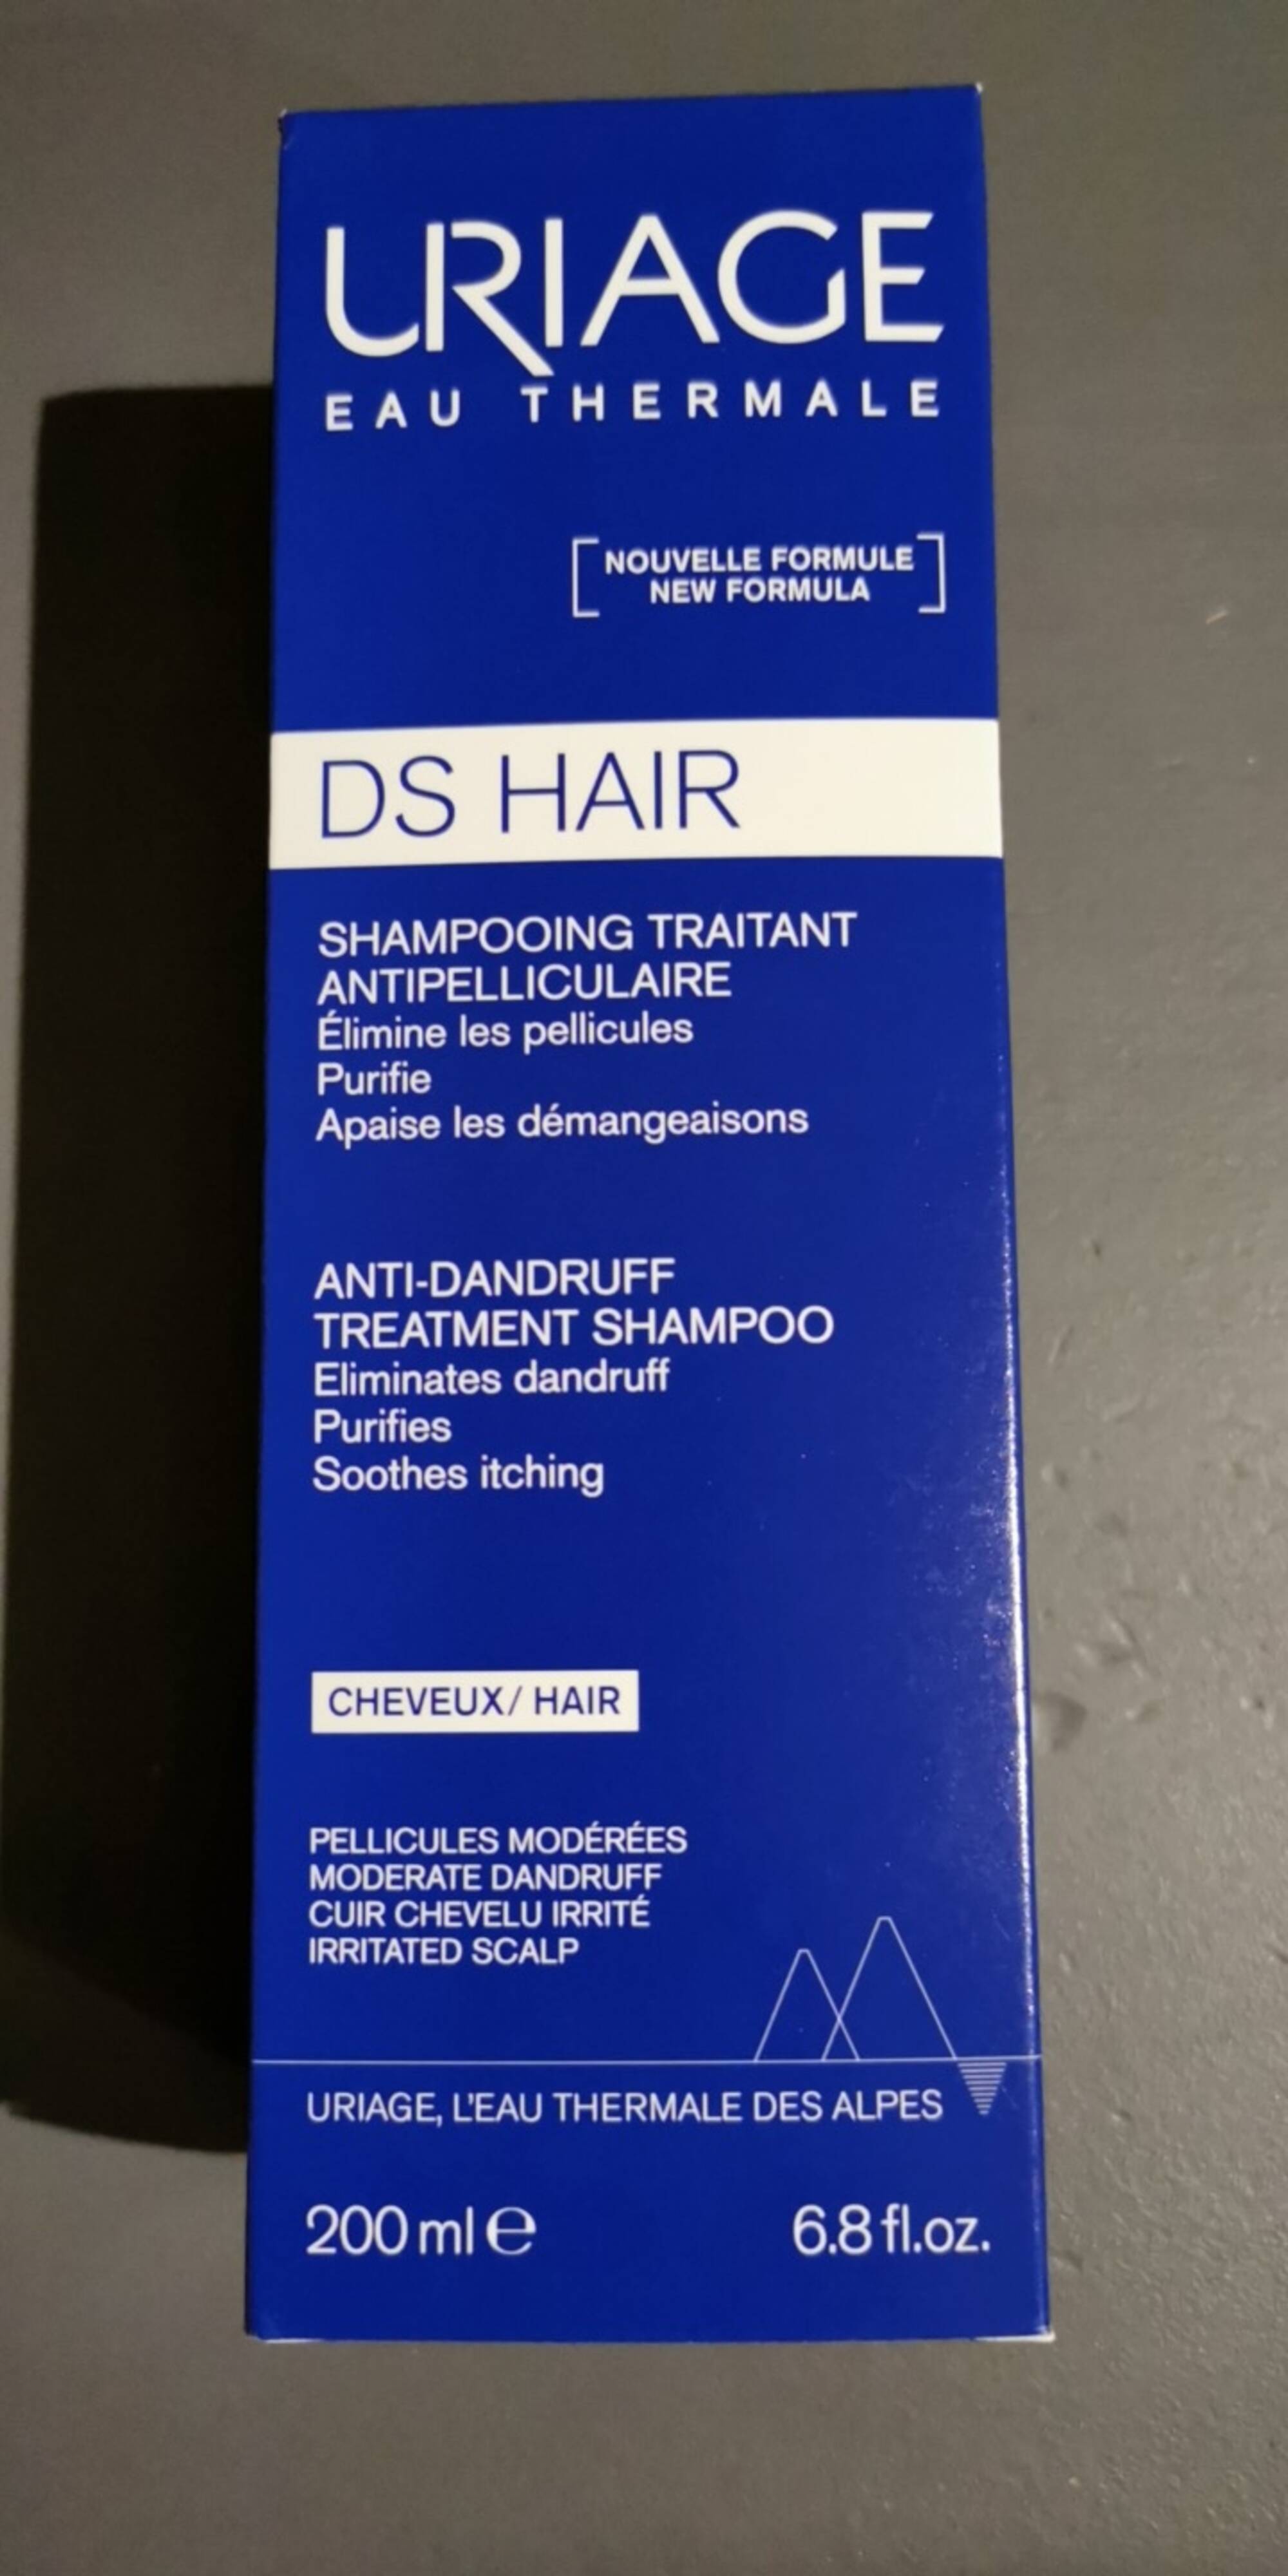 URIAGE - Ds hair - Shampooing traitant antipelliculaire